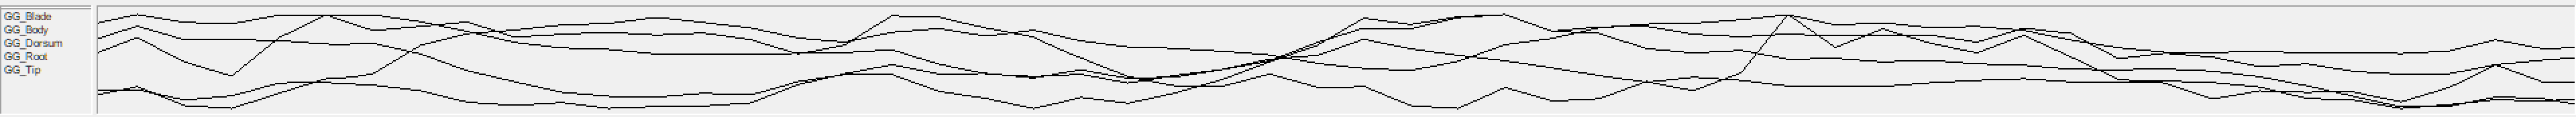 Image showing the default Analysis Value chart appearance, which is hard to read